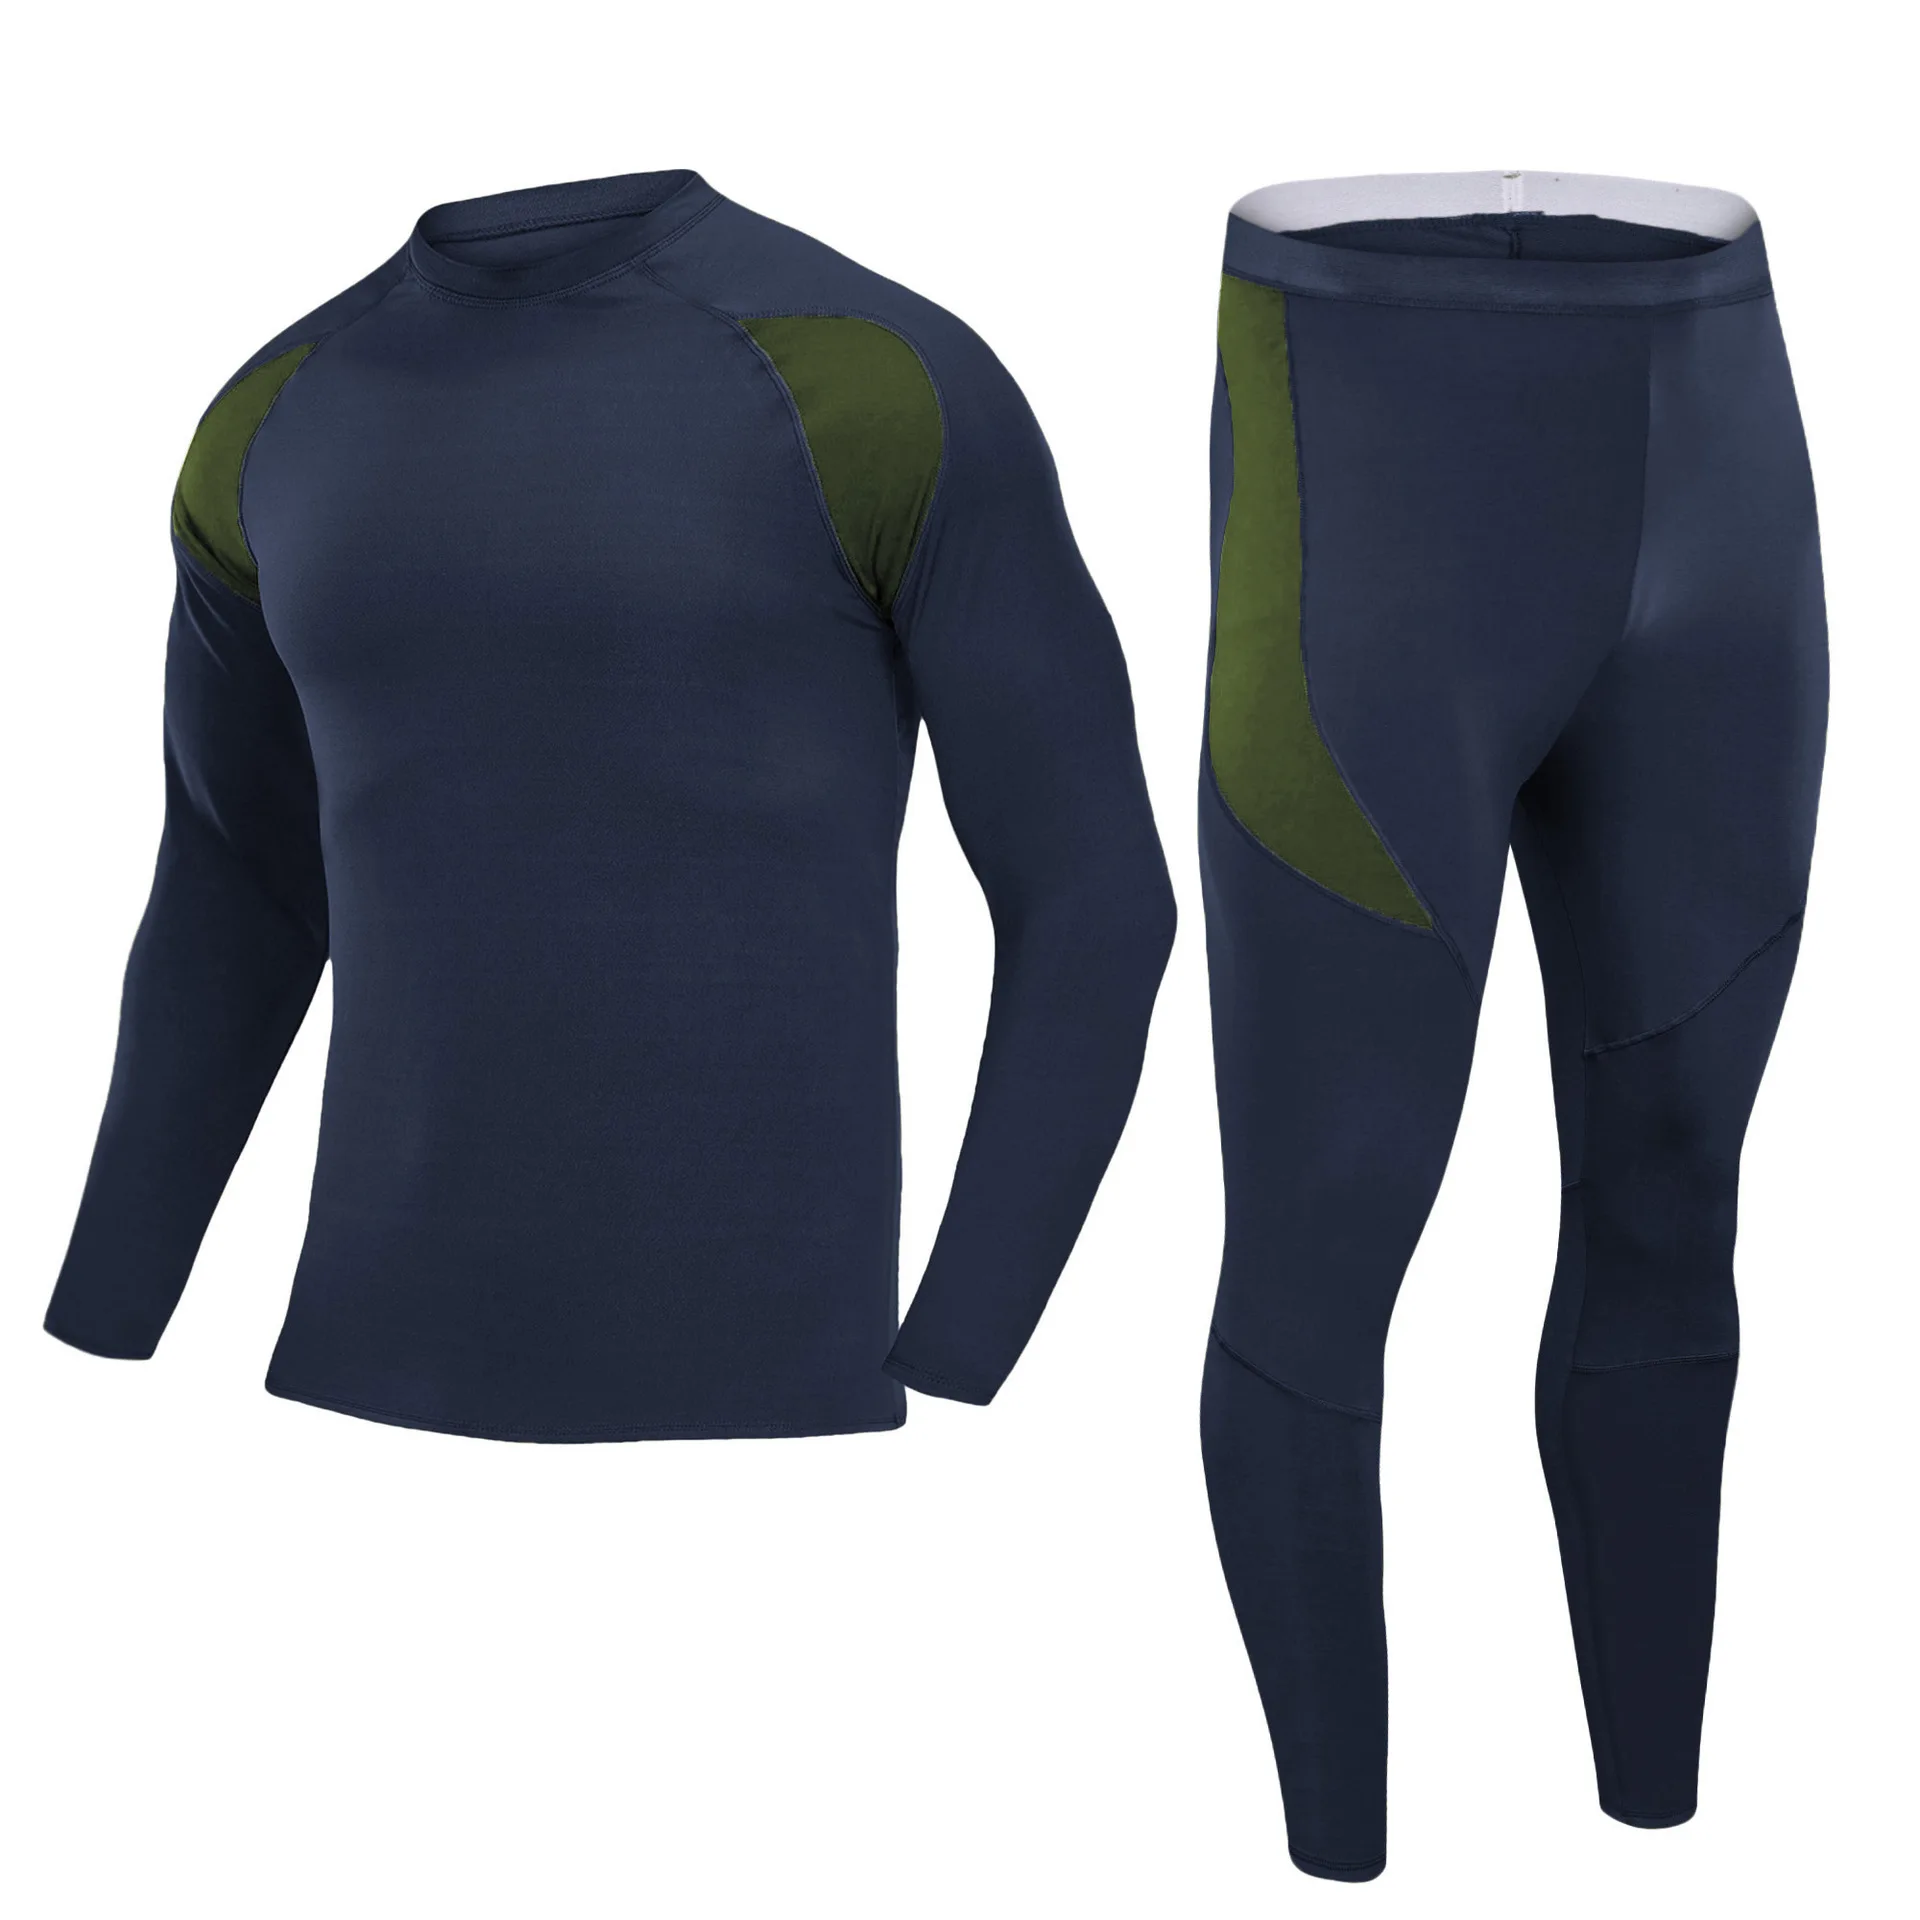 

Men Outdoor Fleece Thermal Underwear High Elastic Tight Physical Training Clothes Autumn Winter Riding Hiking Sport Underclothes